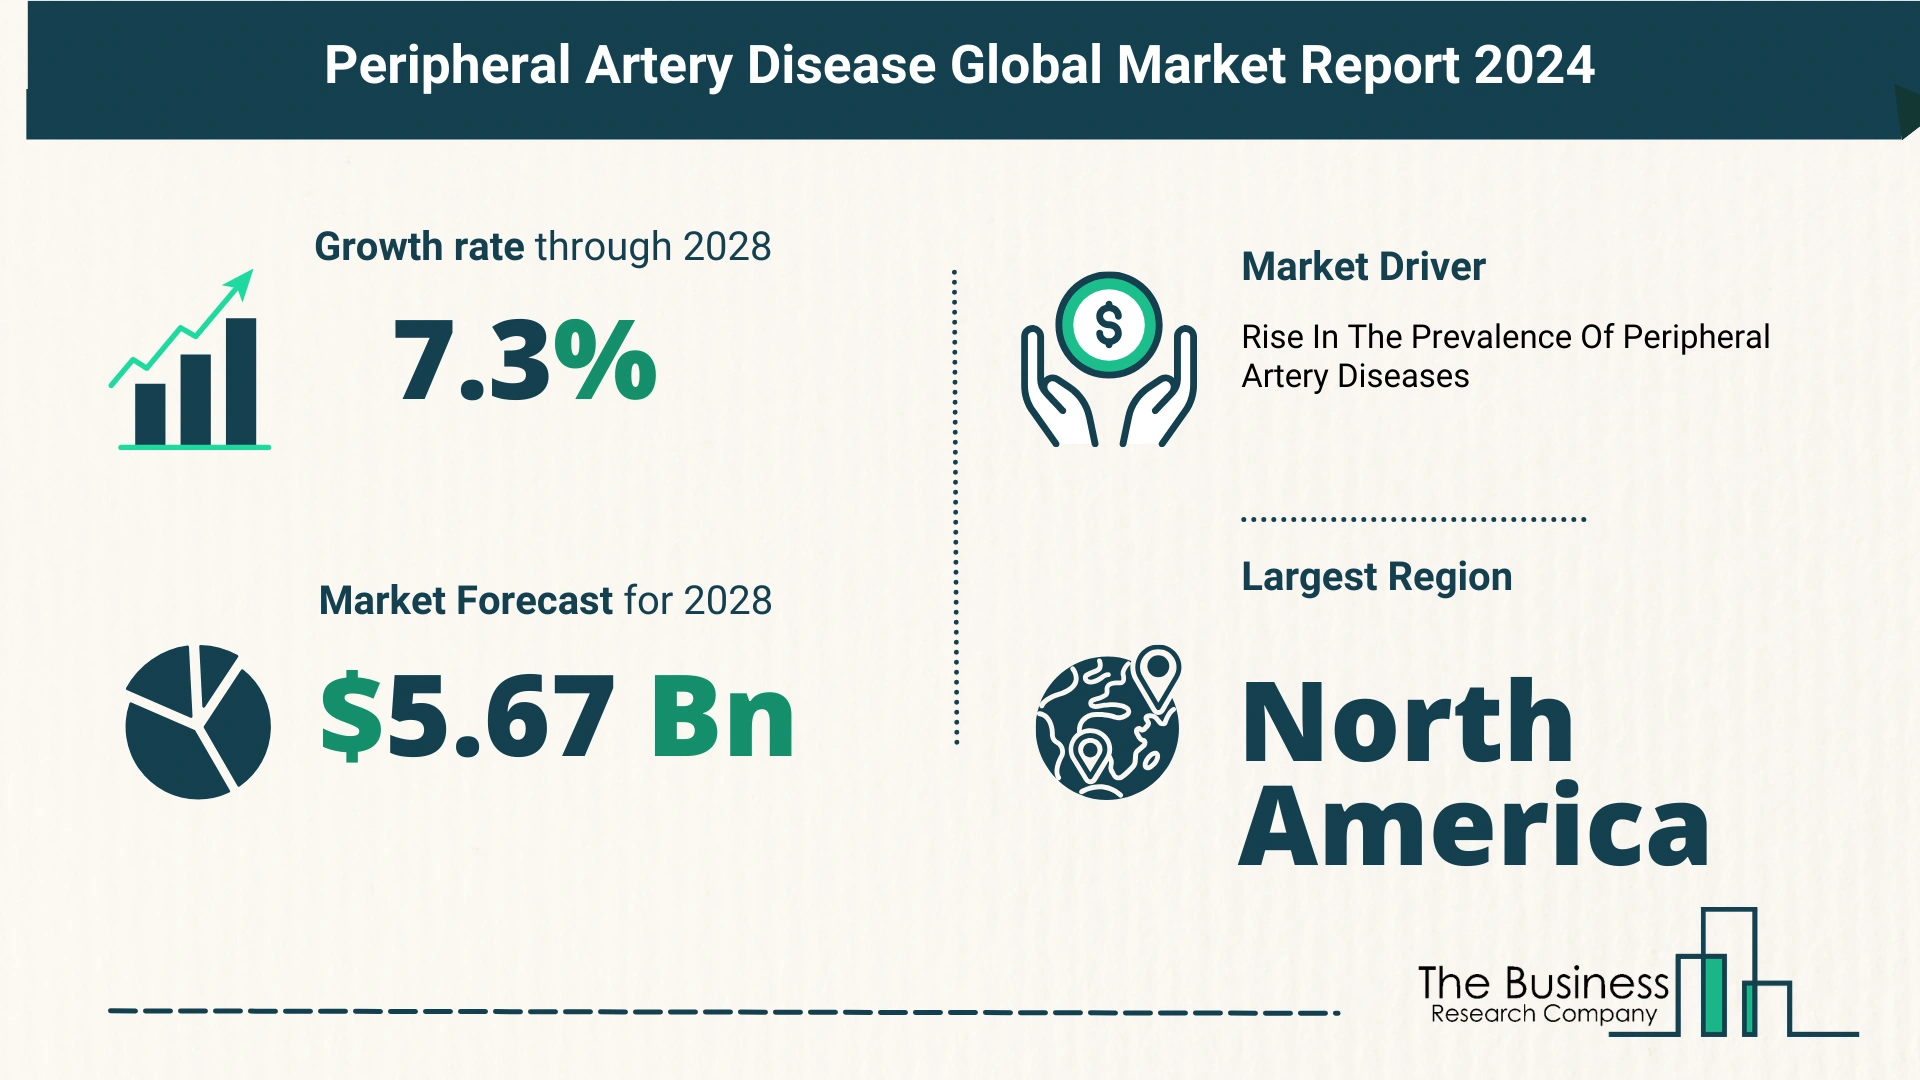 Key Insights On The Peripheral Artery Disease Market 2024 – Size, Driver, And Major Players